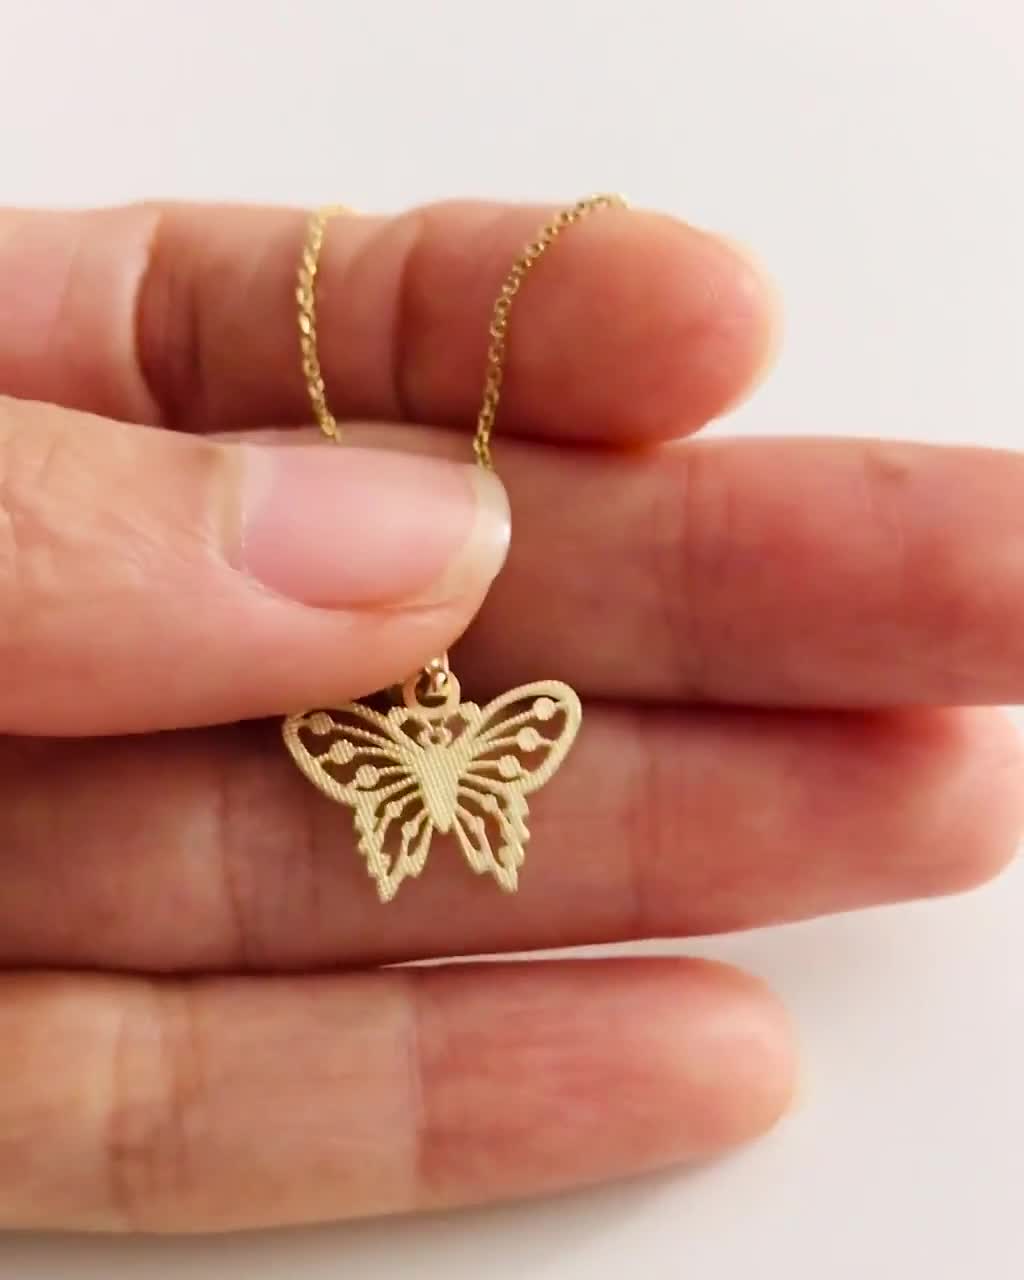 10K Solid Gold 16mm Butterfly Pendant, 10K Dainty Butterfly Necklace, Real  Gold Diamond Cut Butterfly Charm, 10K Solid Gold Necklace - C1002